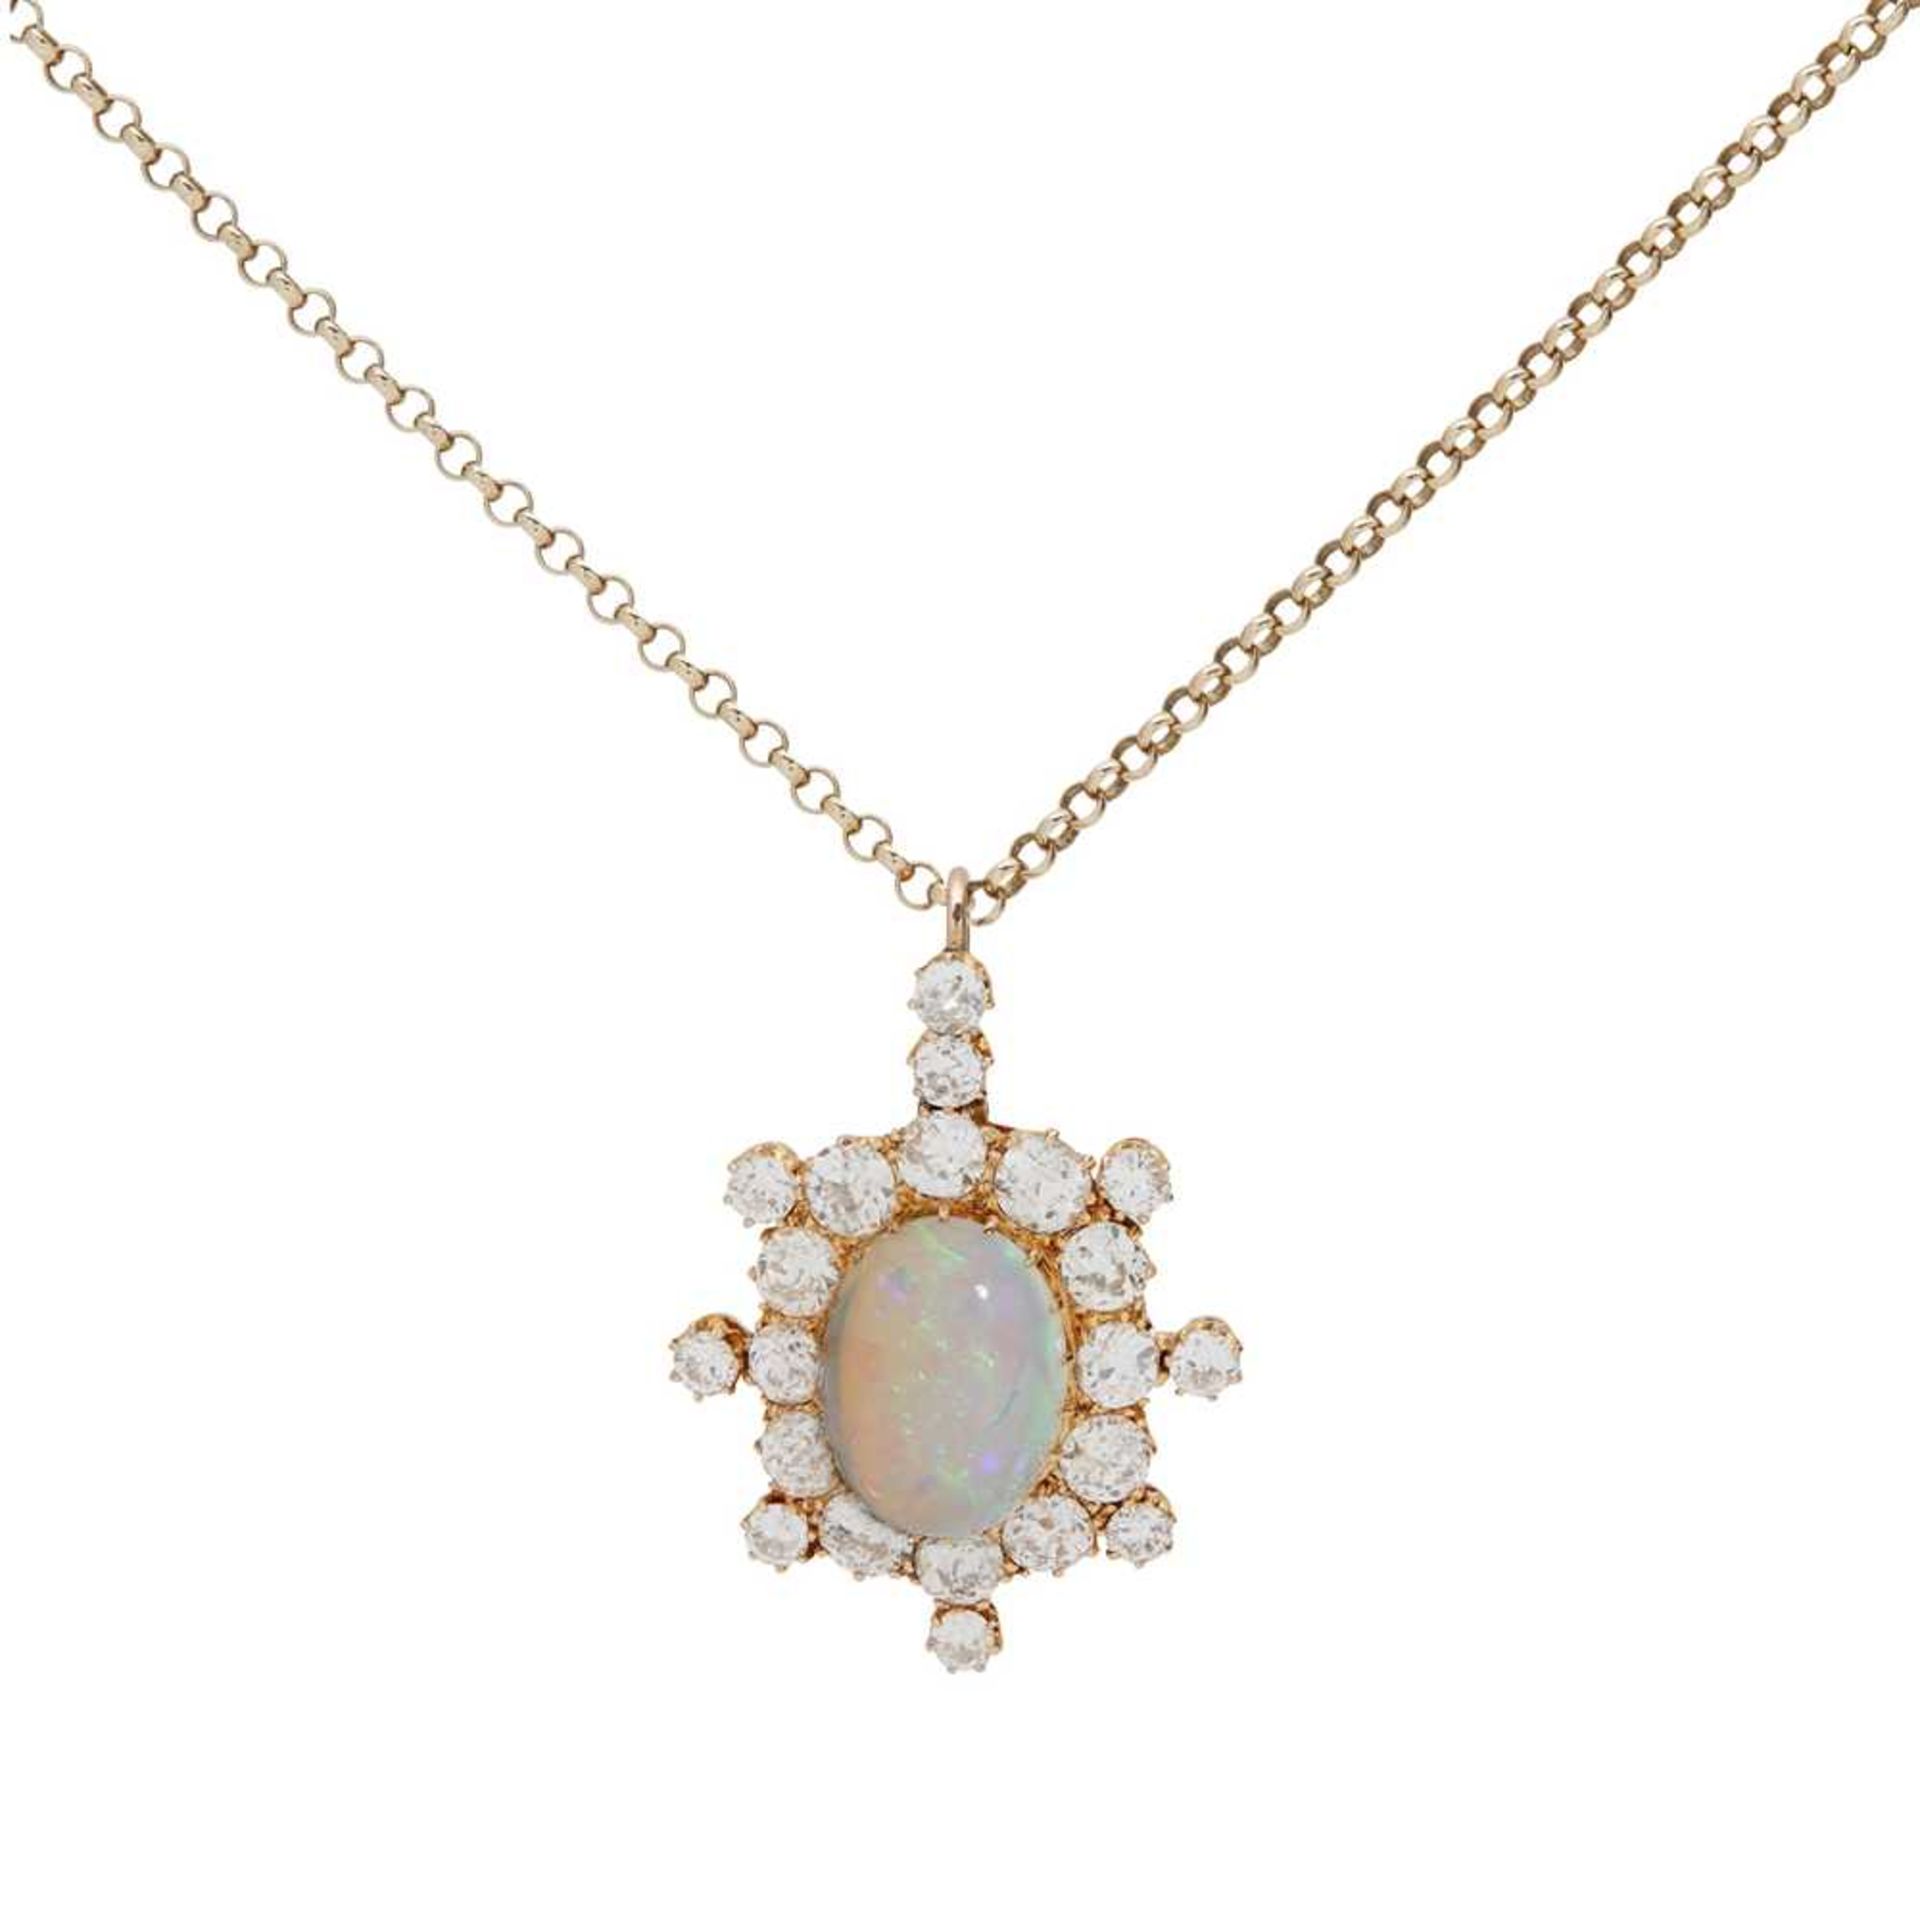 An opal and diamond pendant necklace